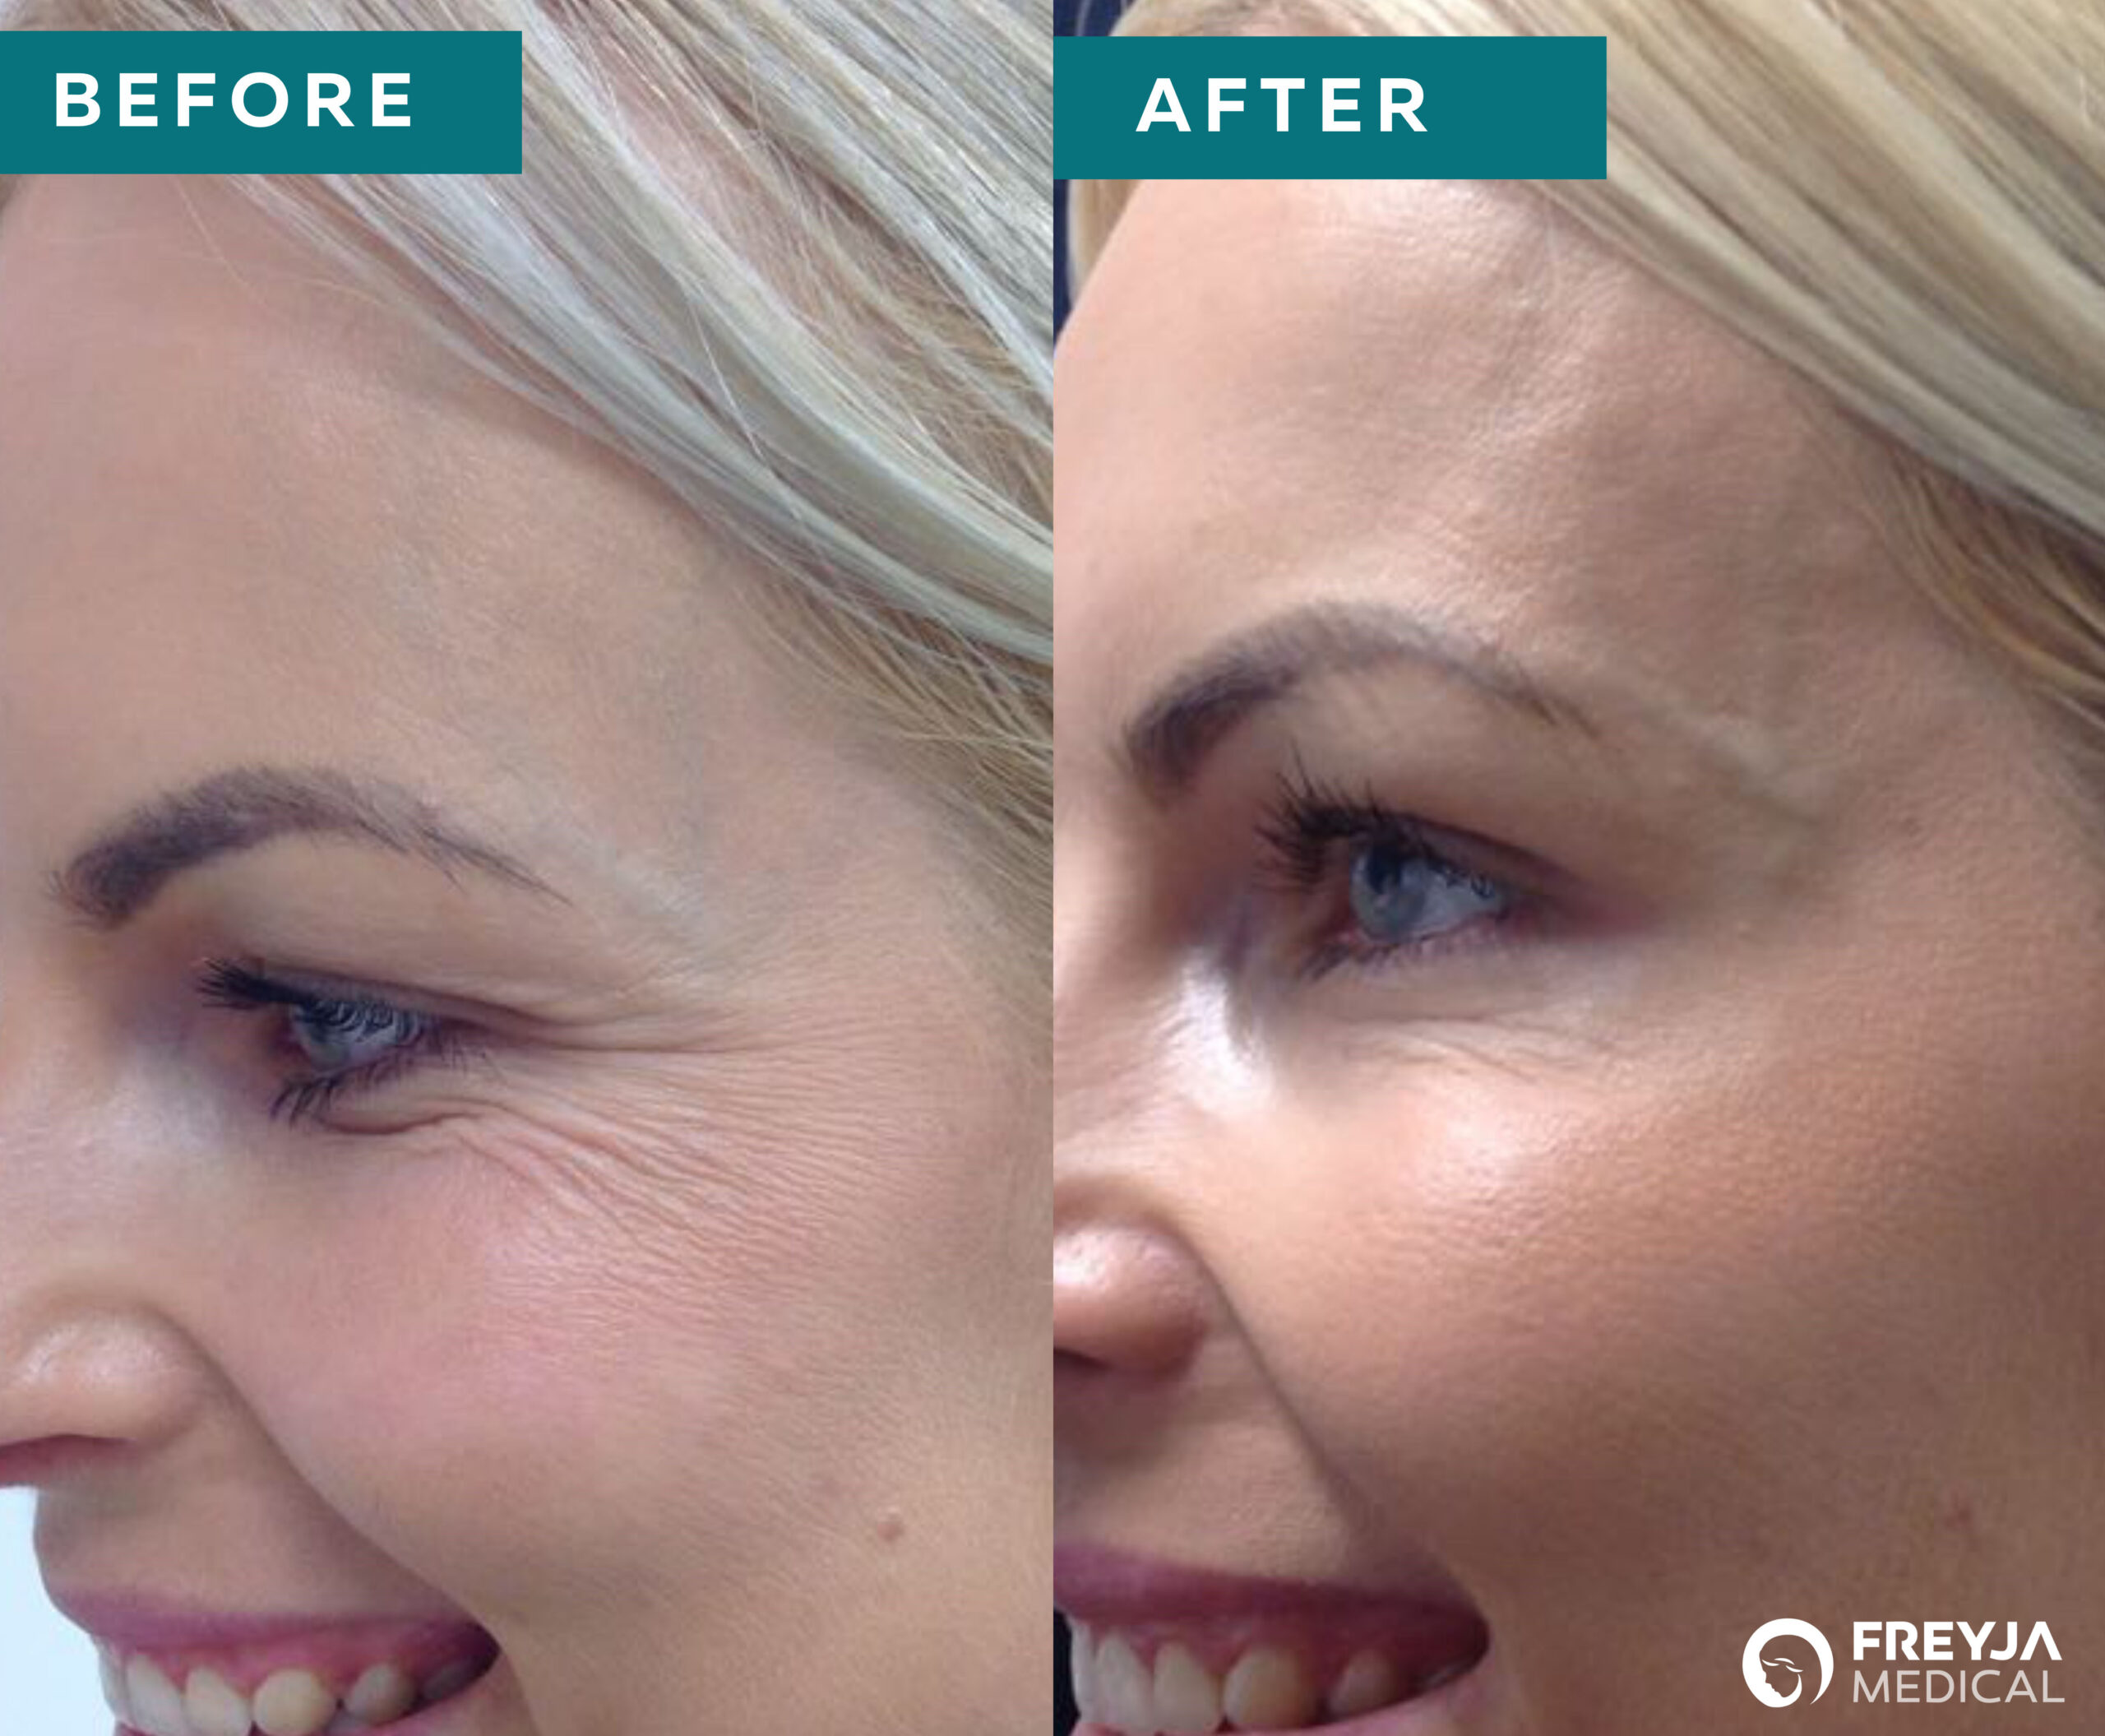 Anti-Wrinkle Treatment for Crows Feet at Freyja Medical. Before and After Image